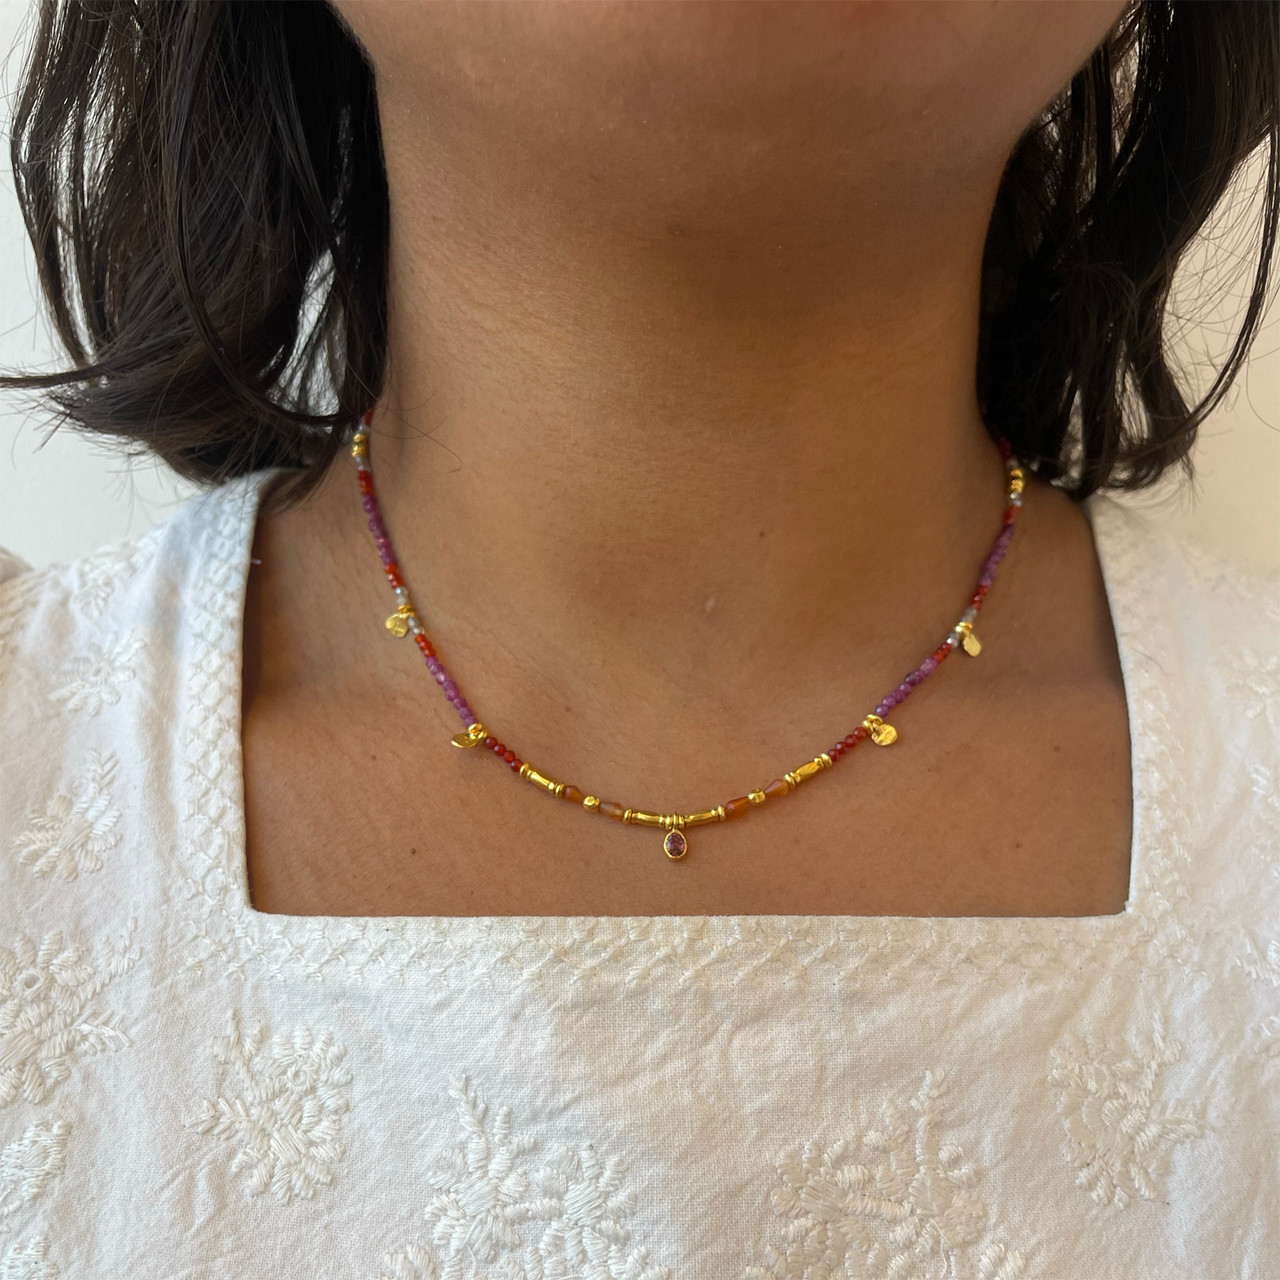 Smarties Gold Plated Beaded Necklace with Ruby, Carnelian & Labradorite, Mary Gaitani, tomfoolery